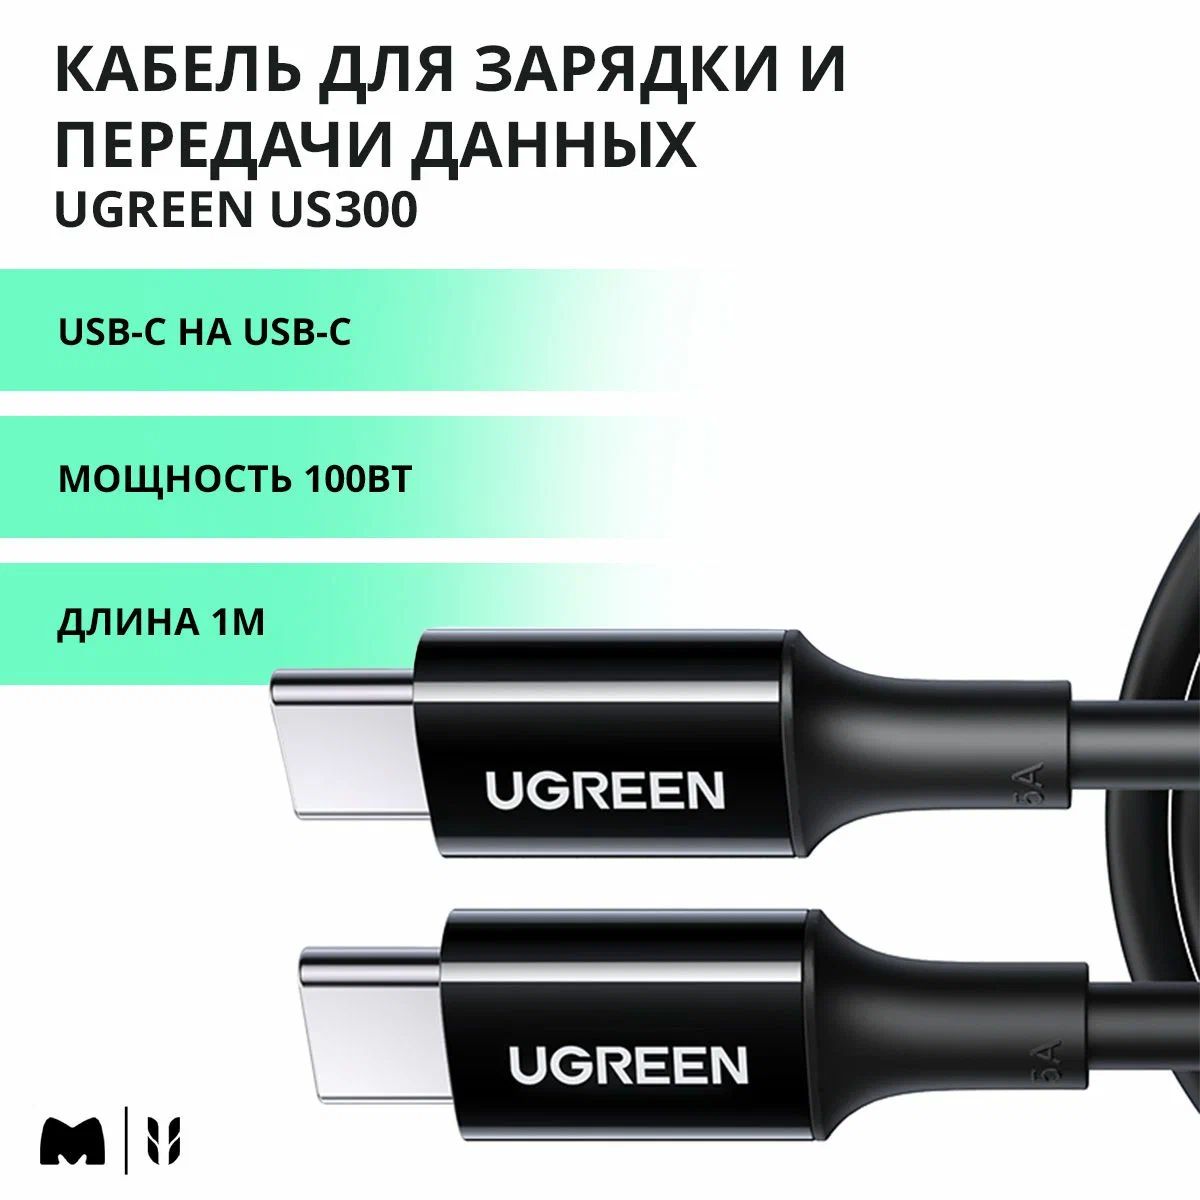 Кабель UGREEN Type-C Male to Type-C Male 2.0 ABS Shell 5A Current, длина 1м, цвет черный (80371) кабель usb type c usb type c 2м ugreen us264 white 60520